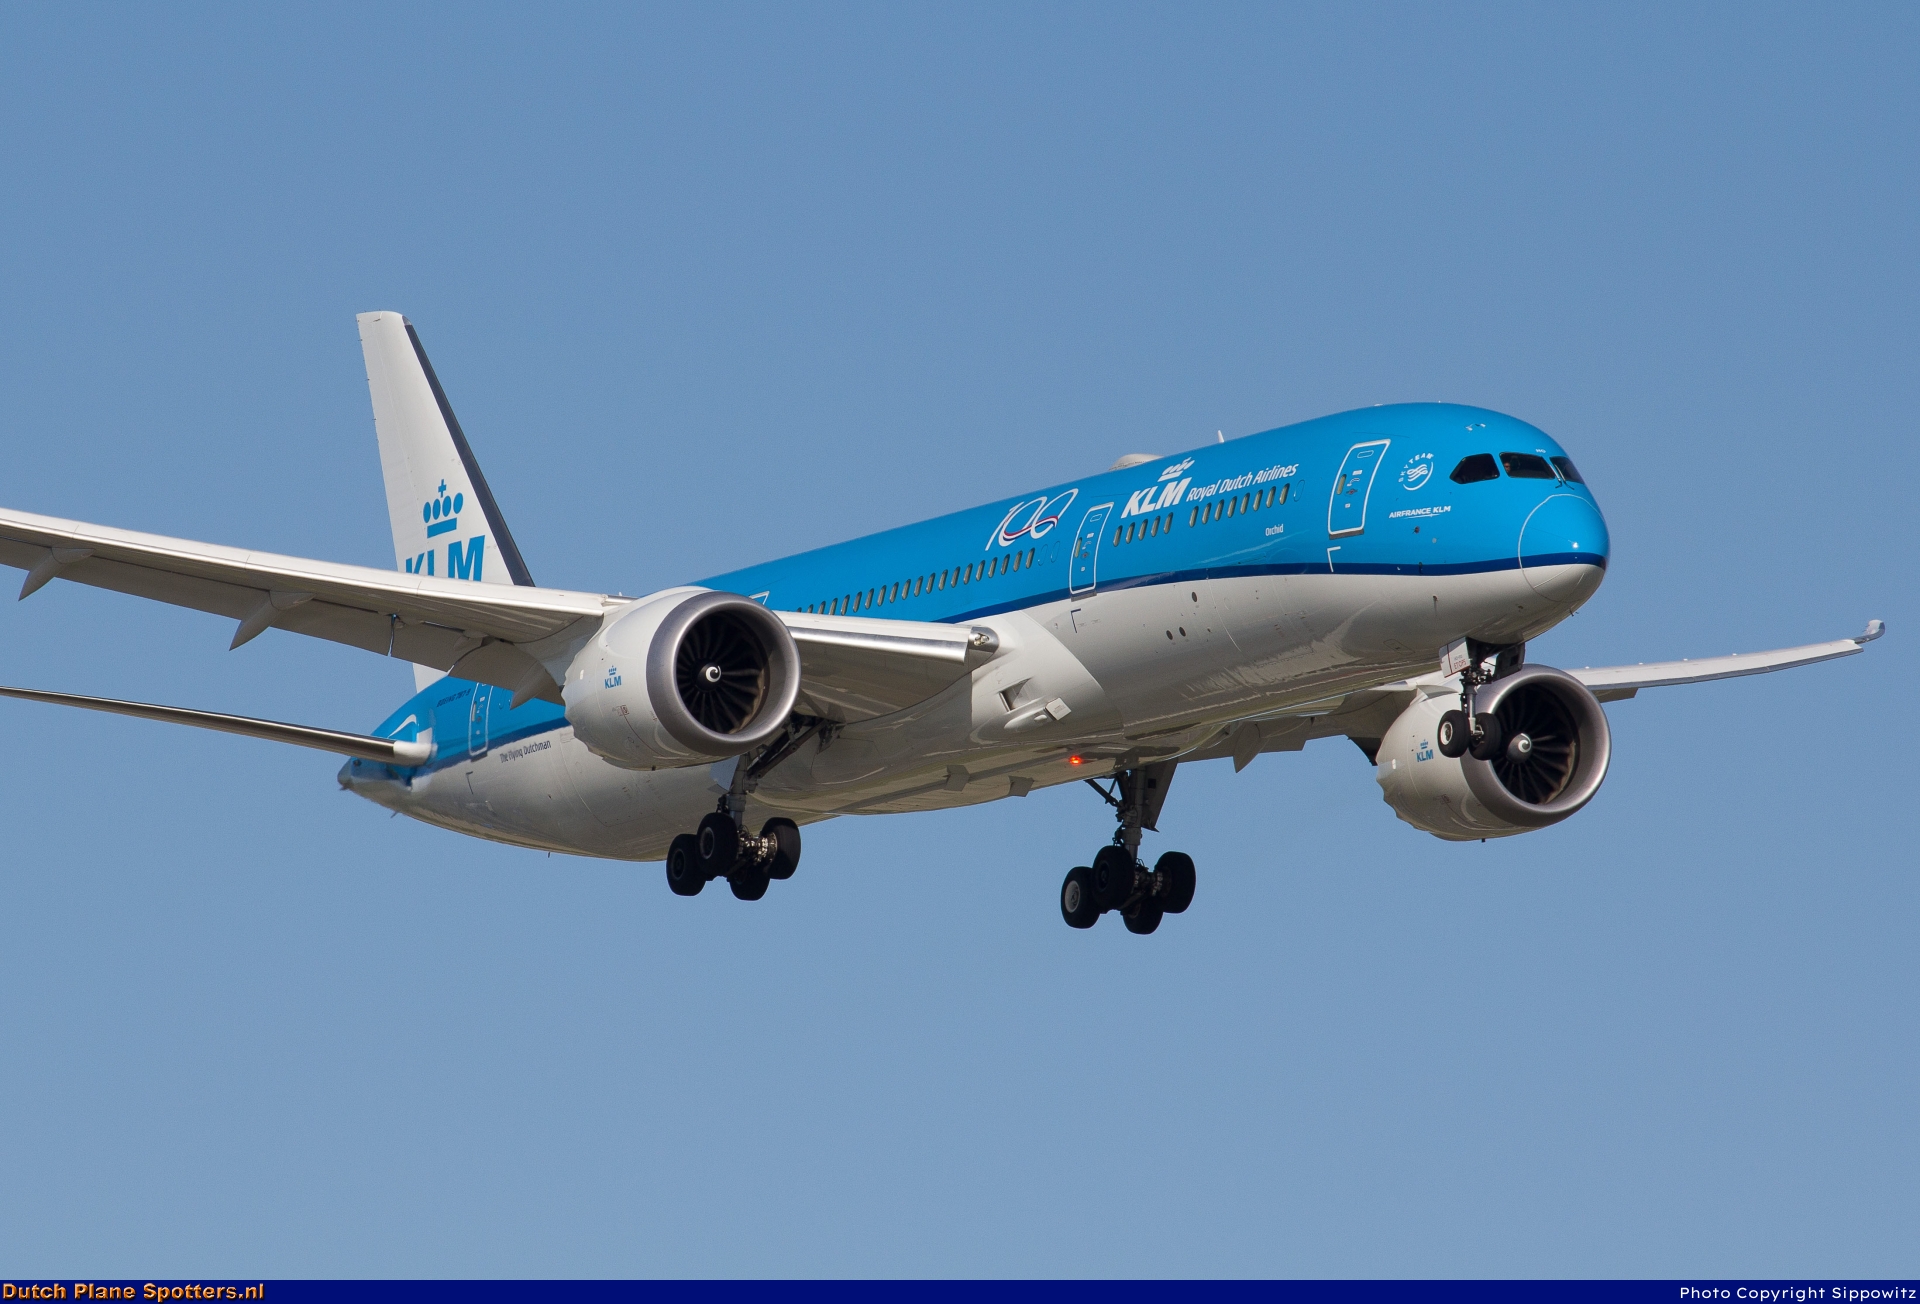 PH-BHO Boeing 787-9 Dreamliner KLM Royal Dutch Airlines by Sippowitz